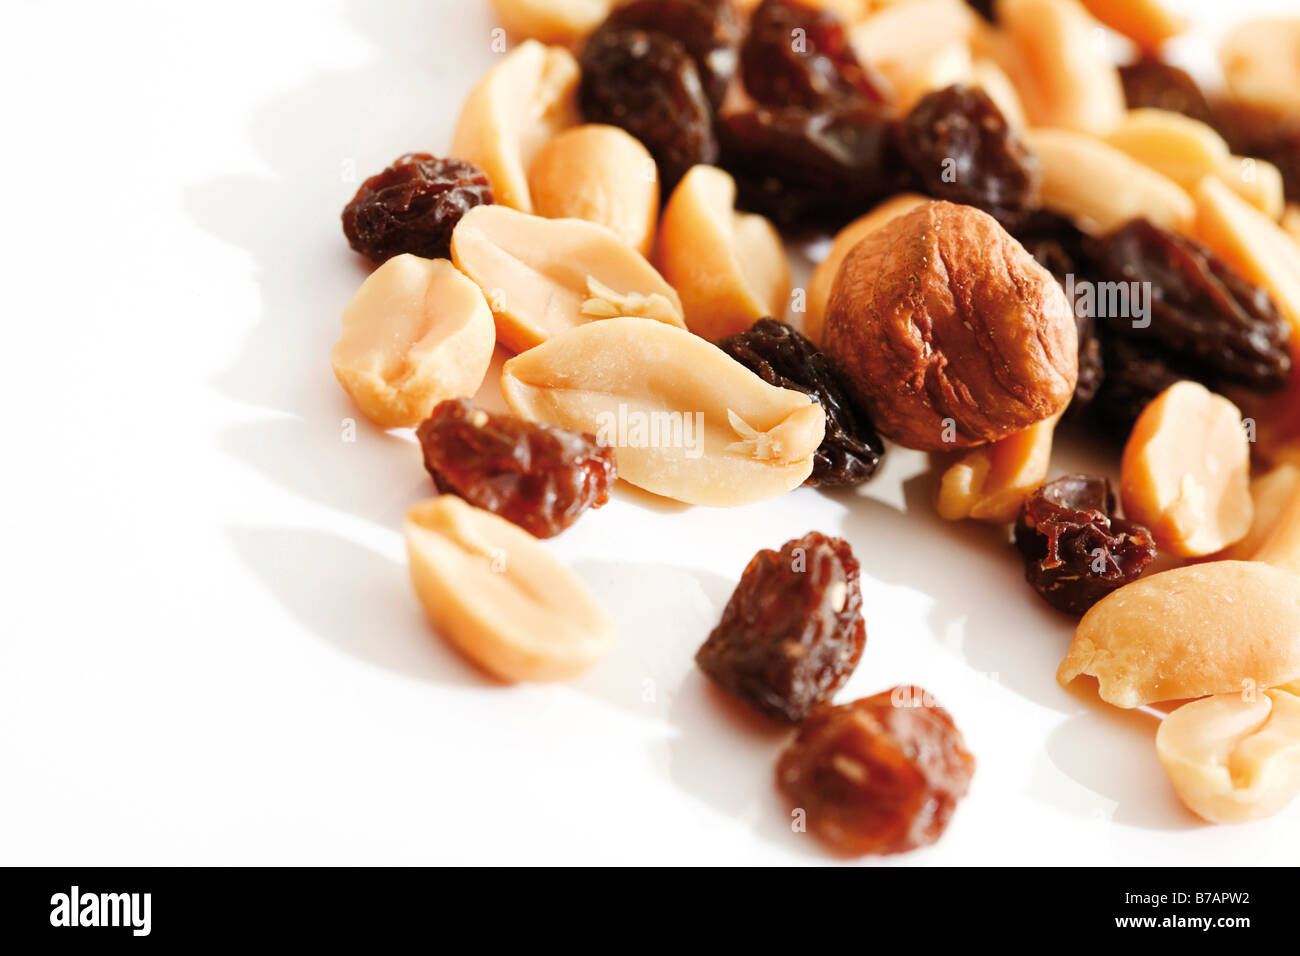 Trail mix, various nuts with raisins Stock Photo